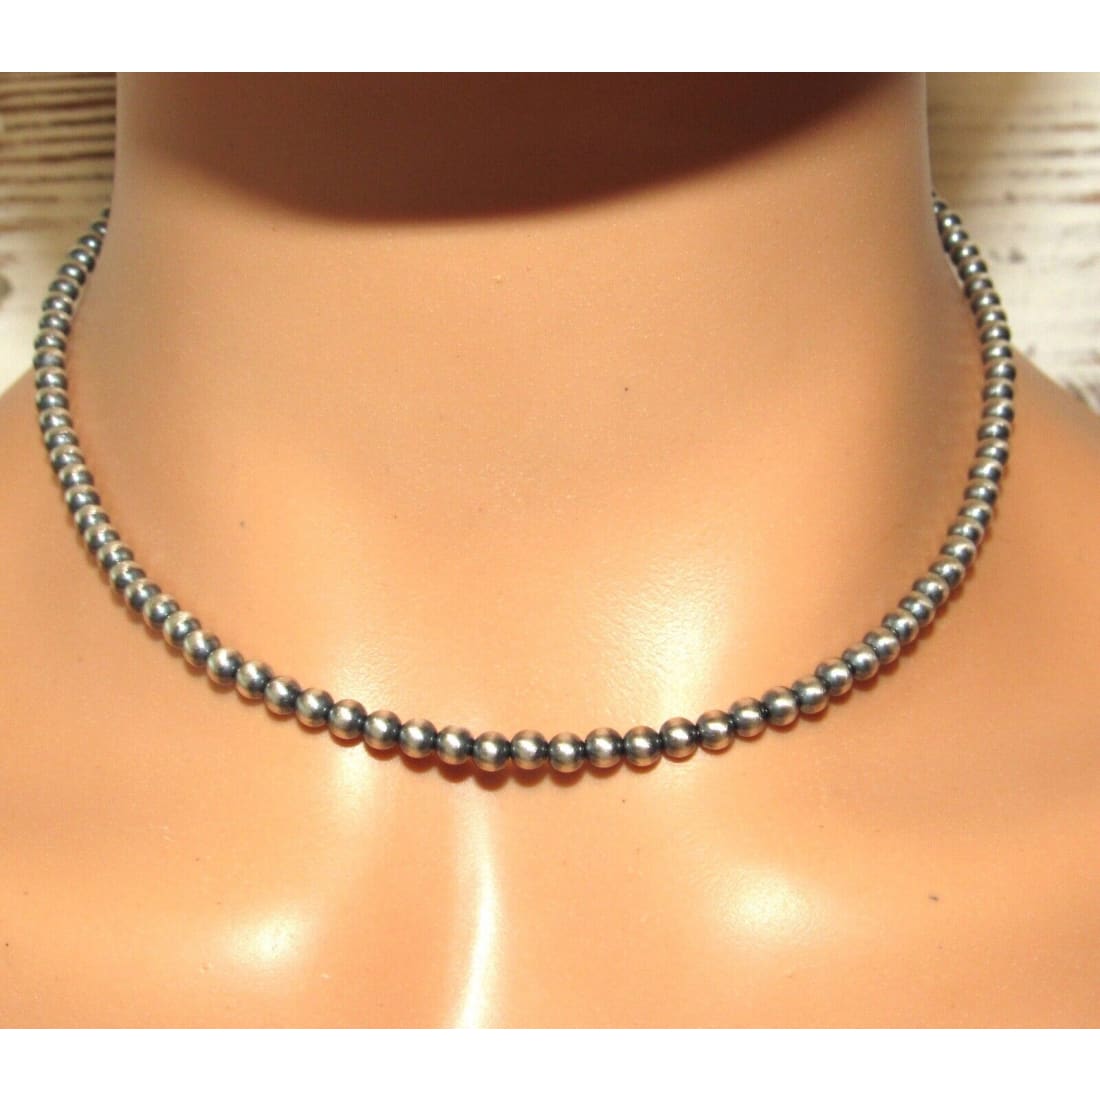 Navajo Pearls Necklace Sterling Silver 4mm Beads Necklace